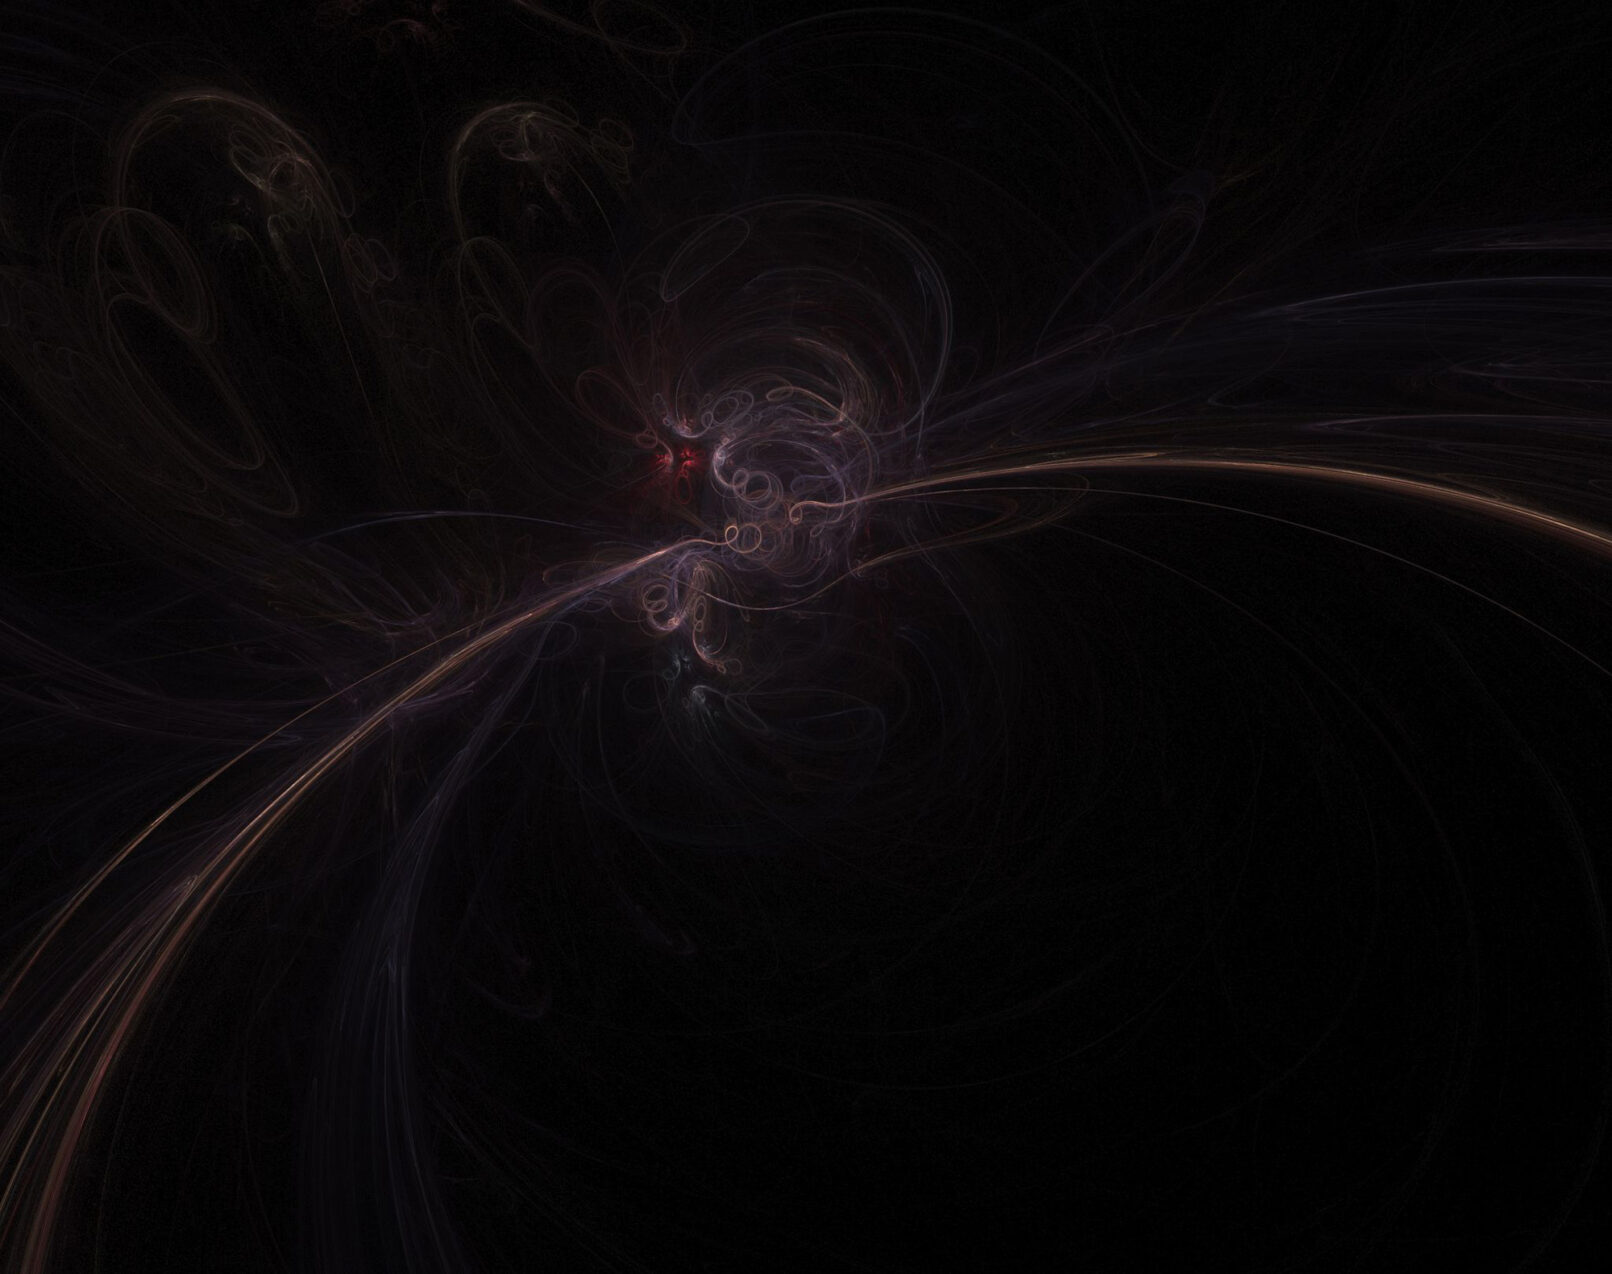 Fractal flame looking like a solar flare or atomic cloud chamber path